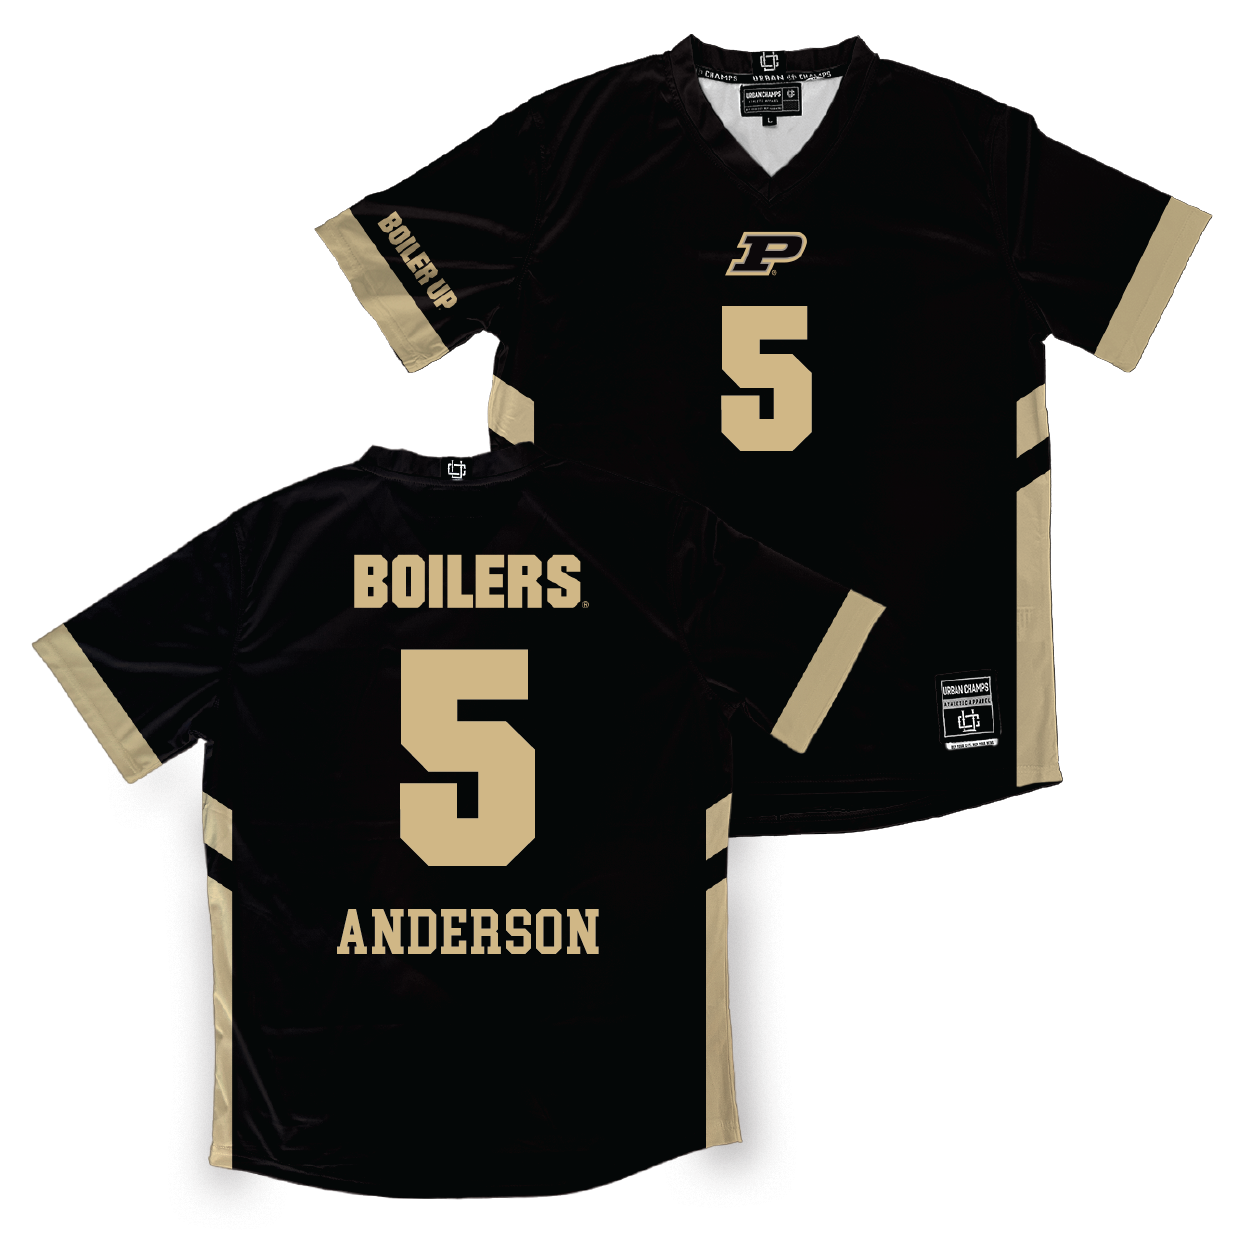 Purdue Women's Volleyball Black Jersey  - Taylor Anderson